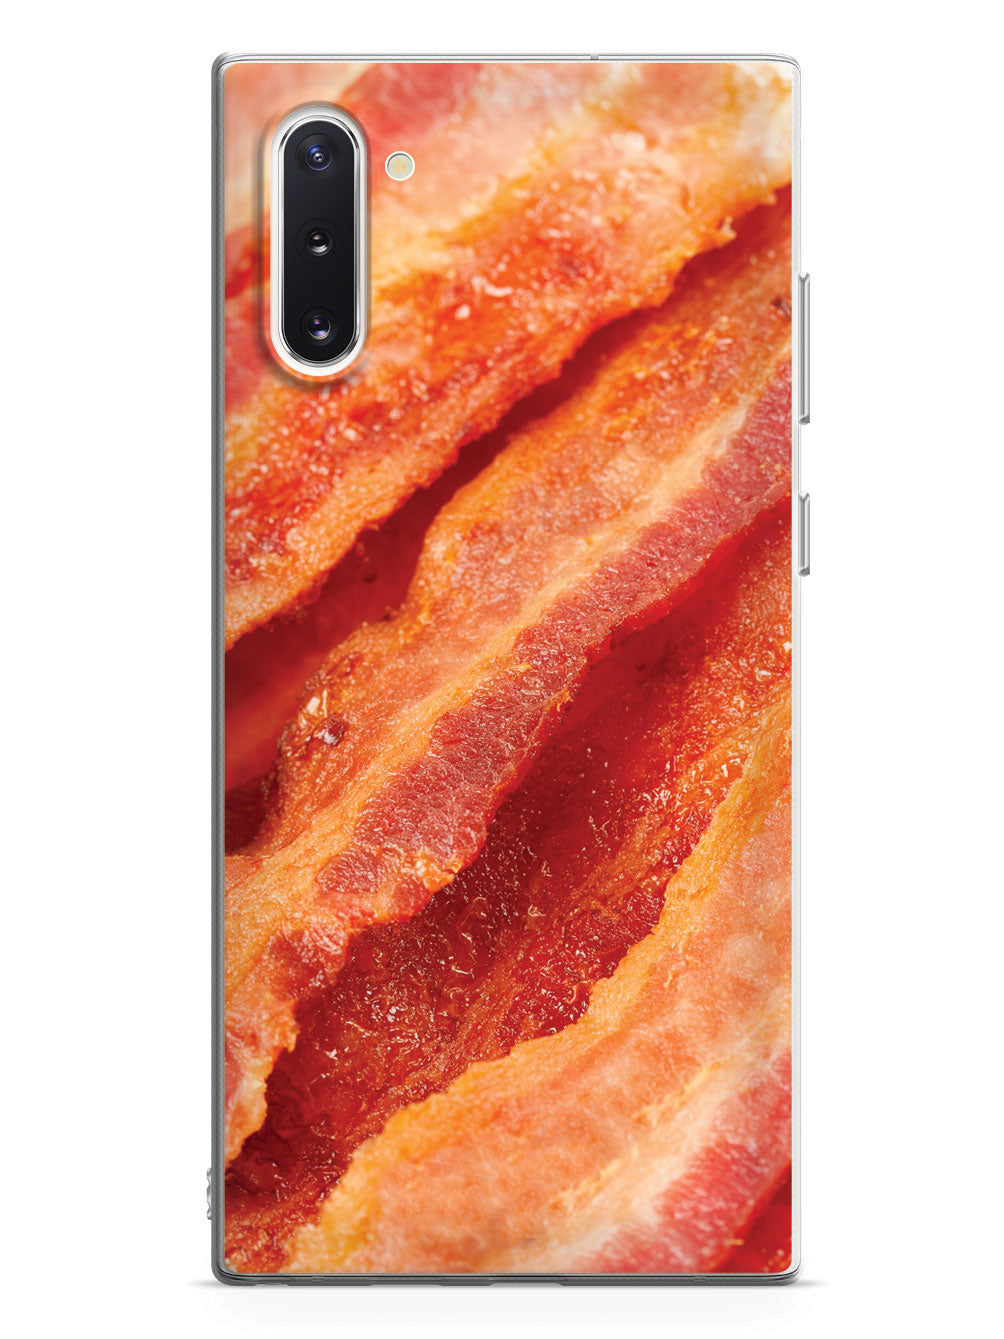 Cooked Bacon Meat Lover's Case